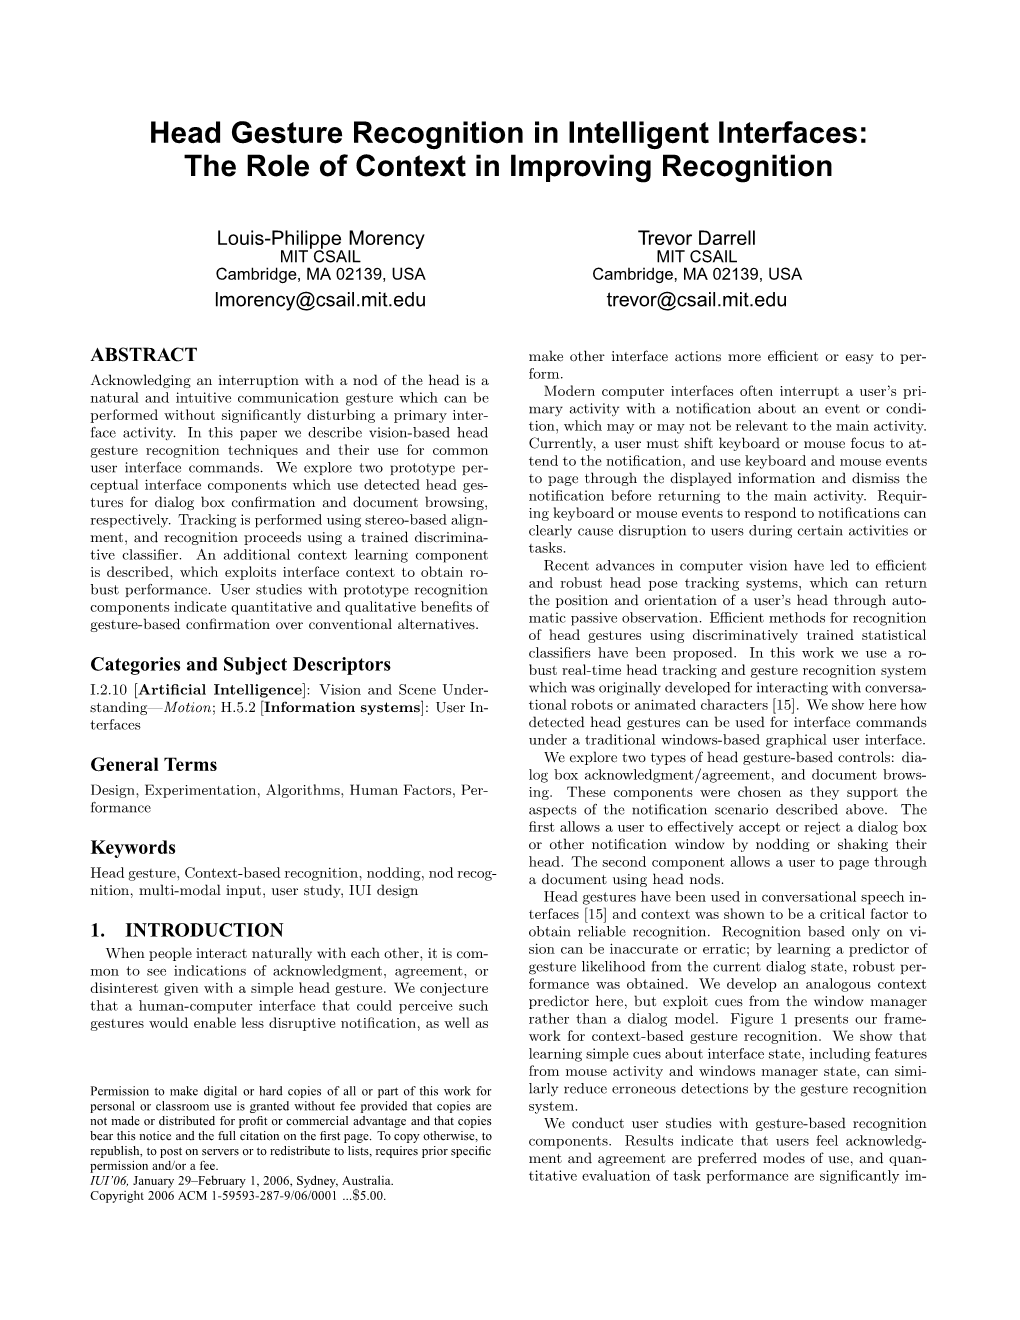 Head Gesture Recognition in Intelligent Interfaces: the Role of Context in Improving Recognition